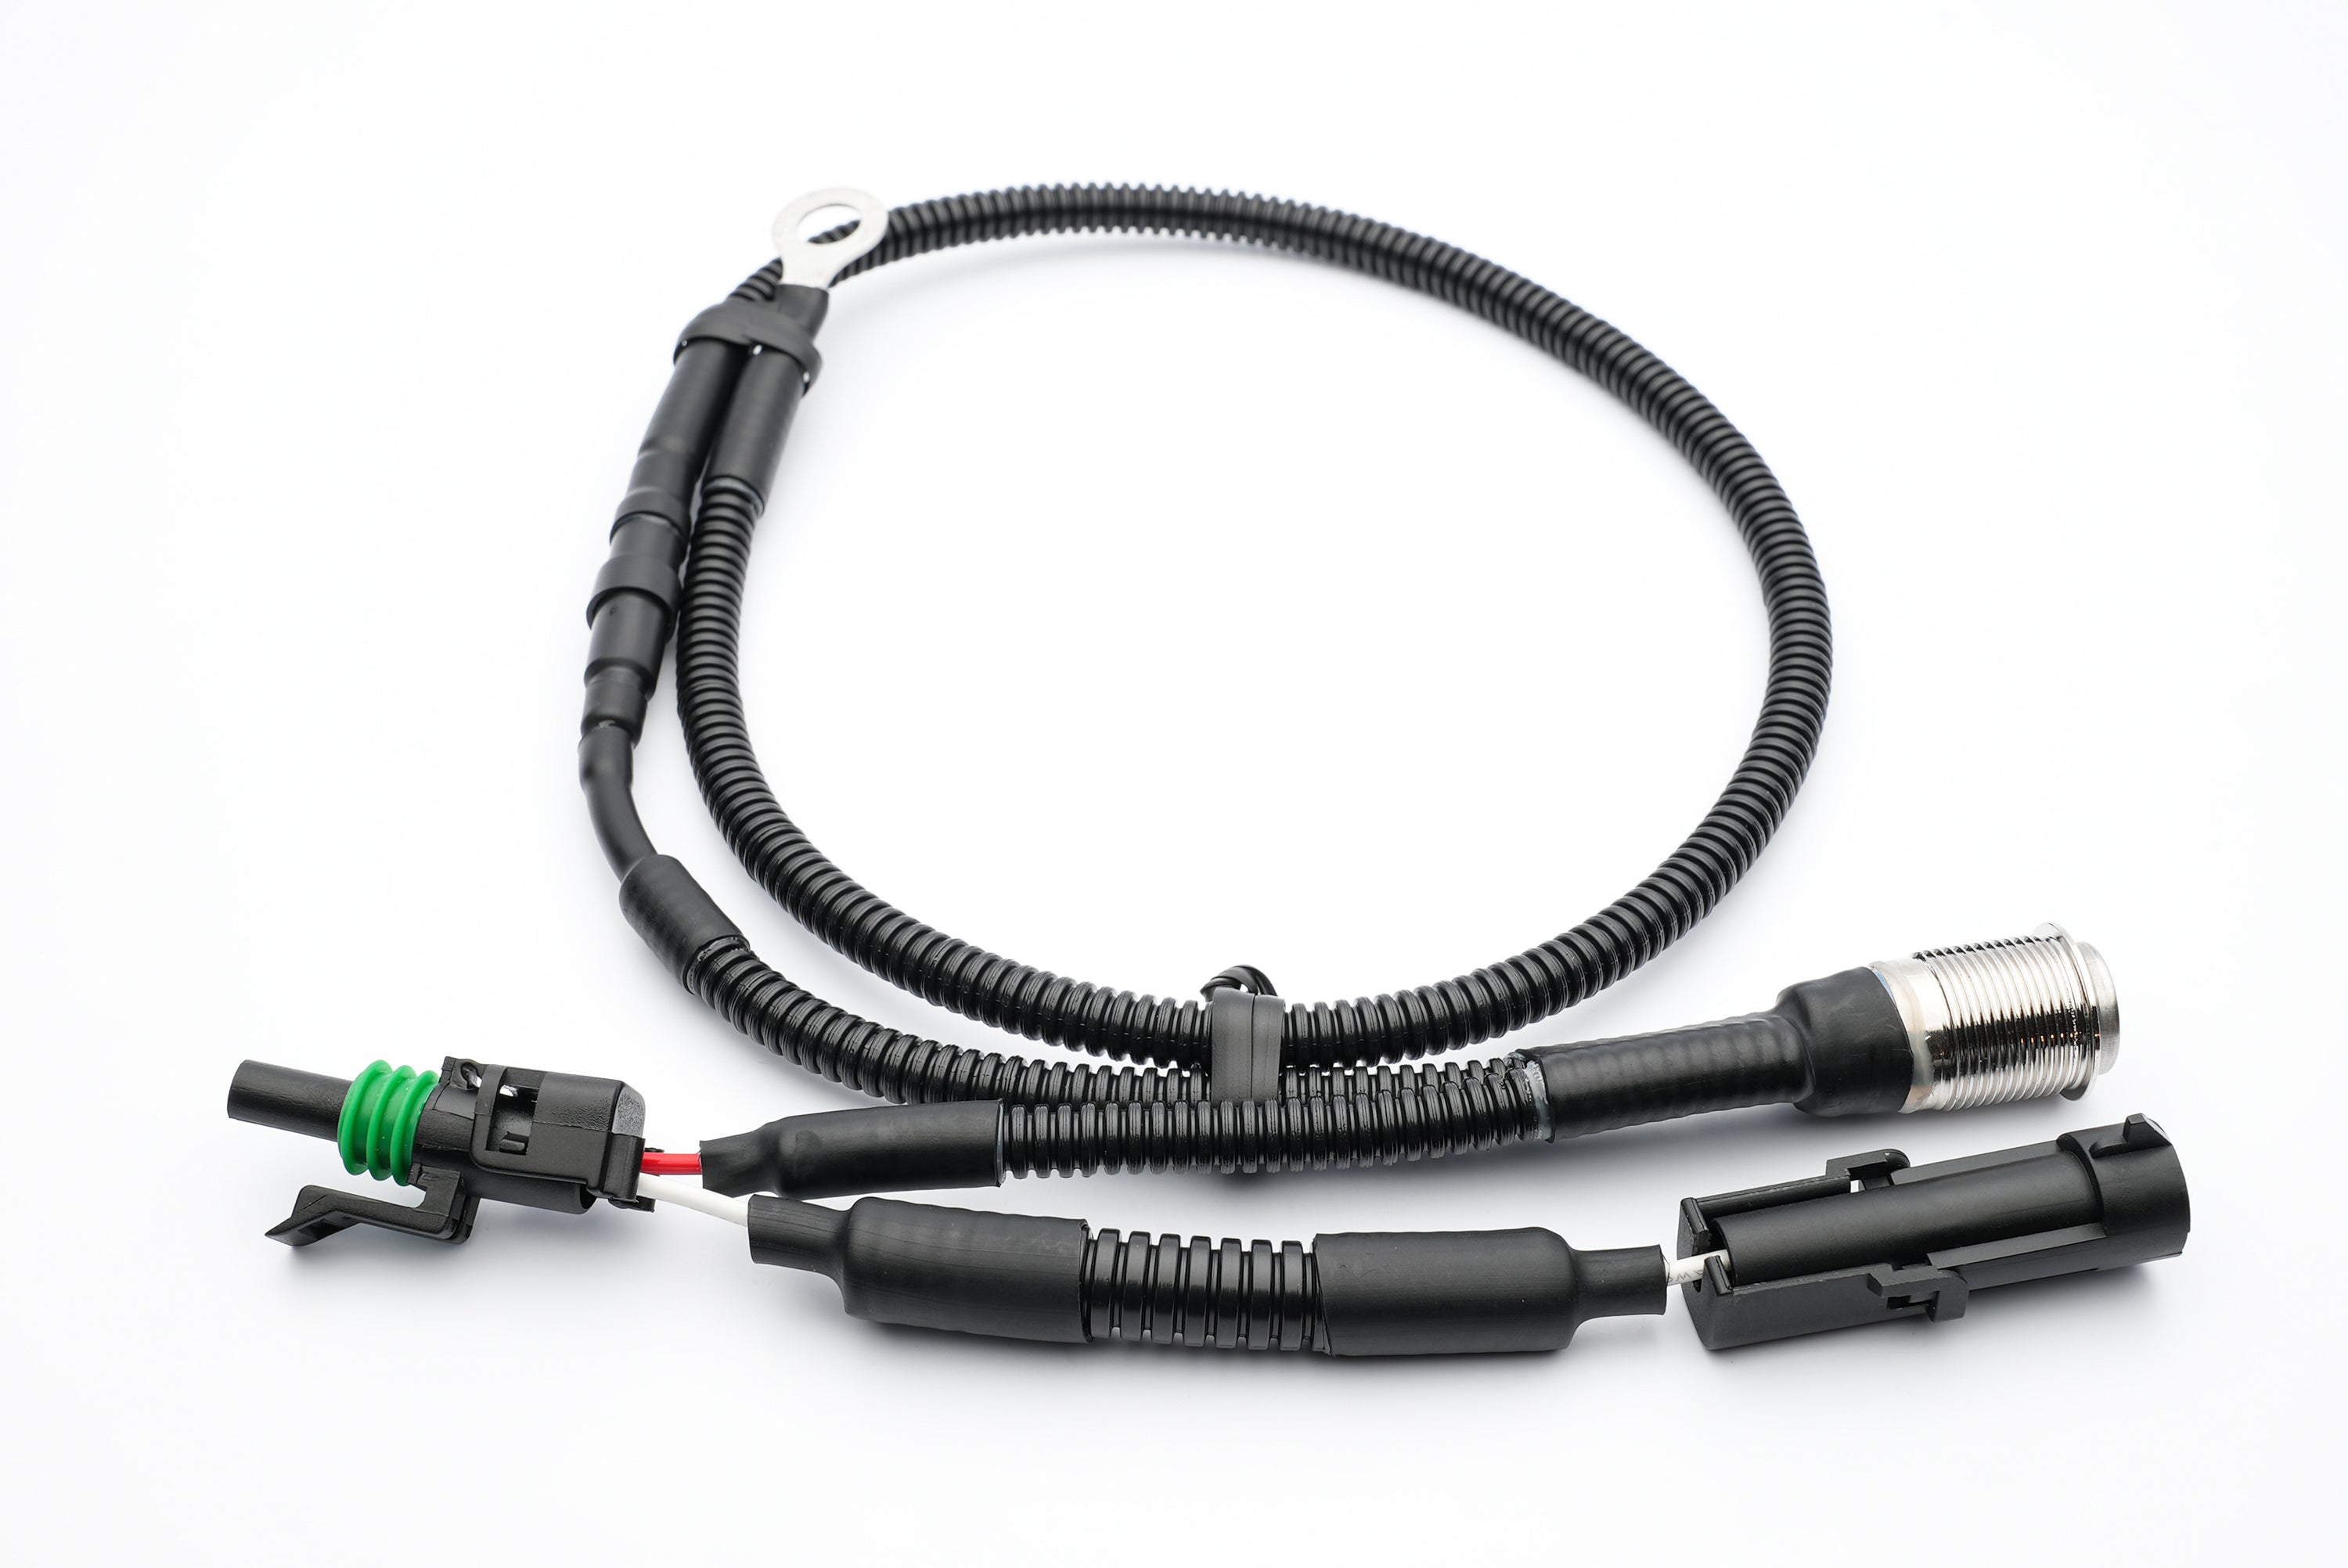 SPV Parts Harness Tap Switch for RGB Color Change - SPV Harness System (Works with MANY vehicles, See Details)